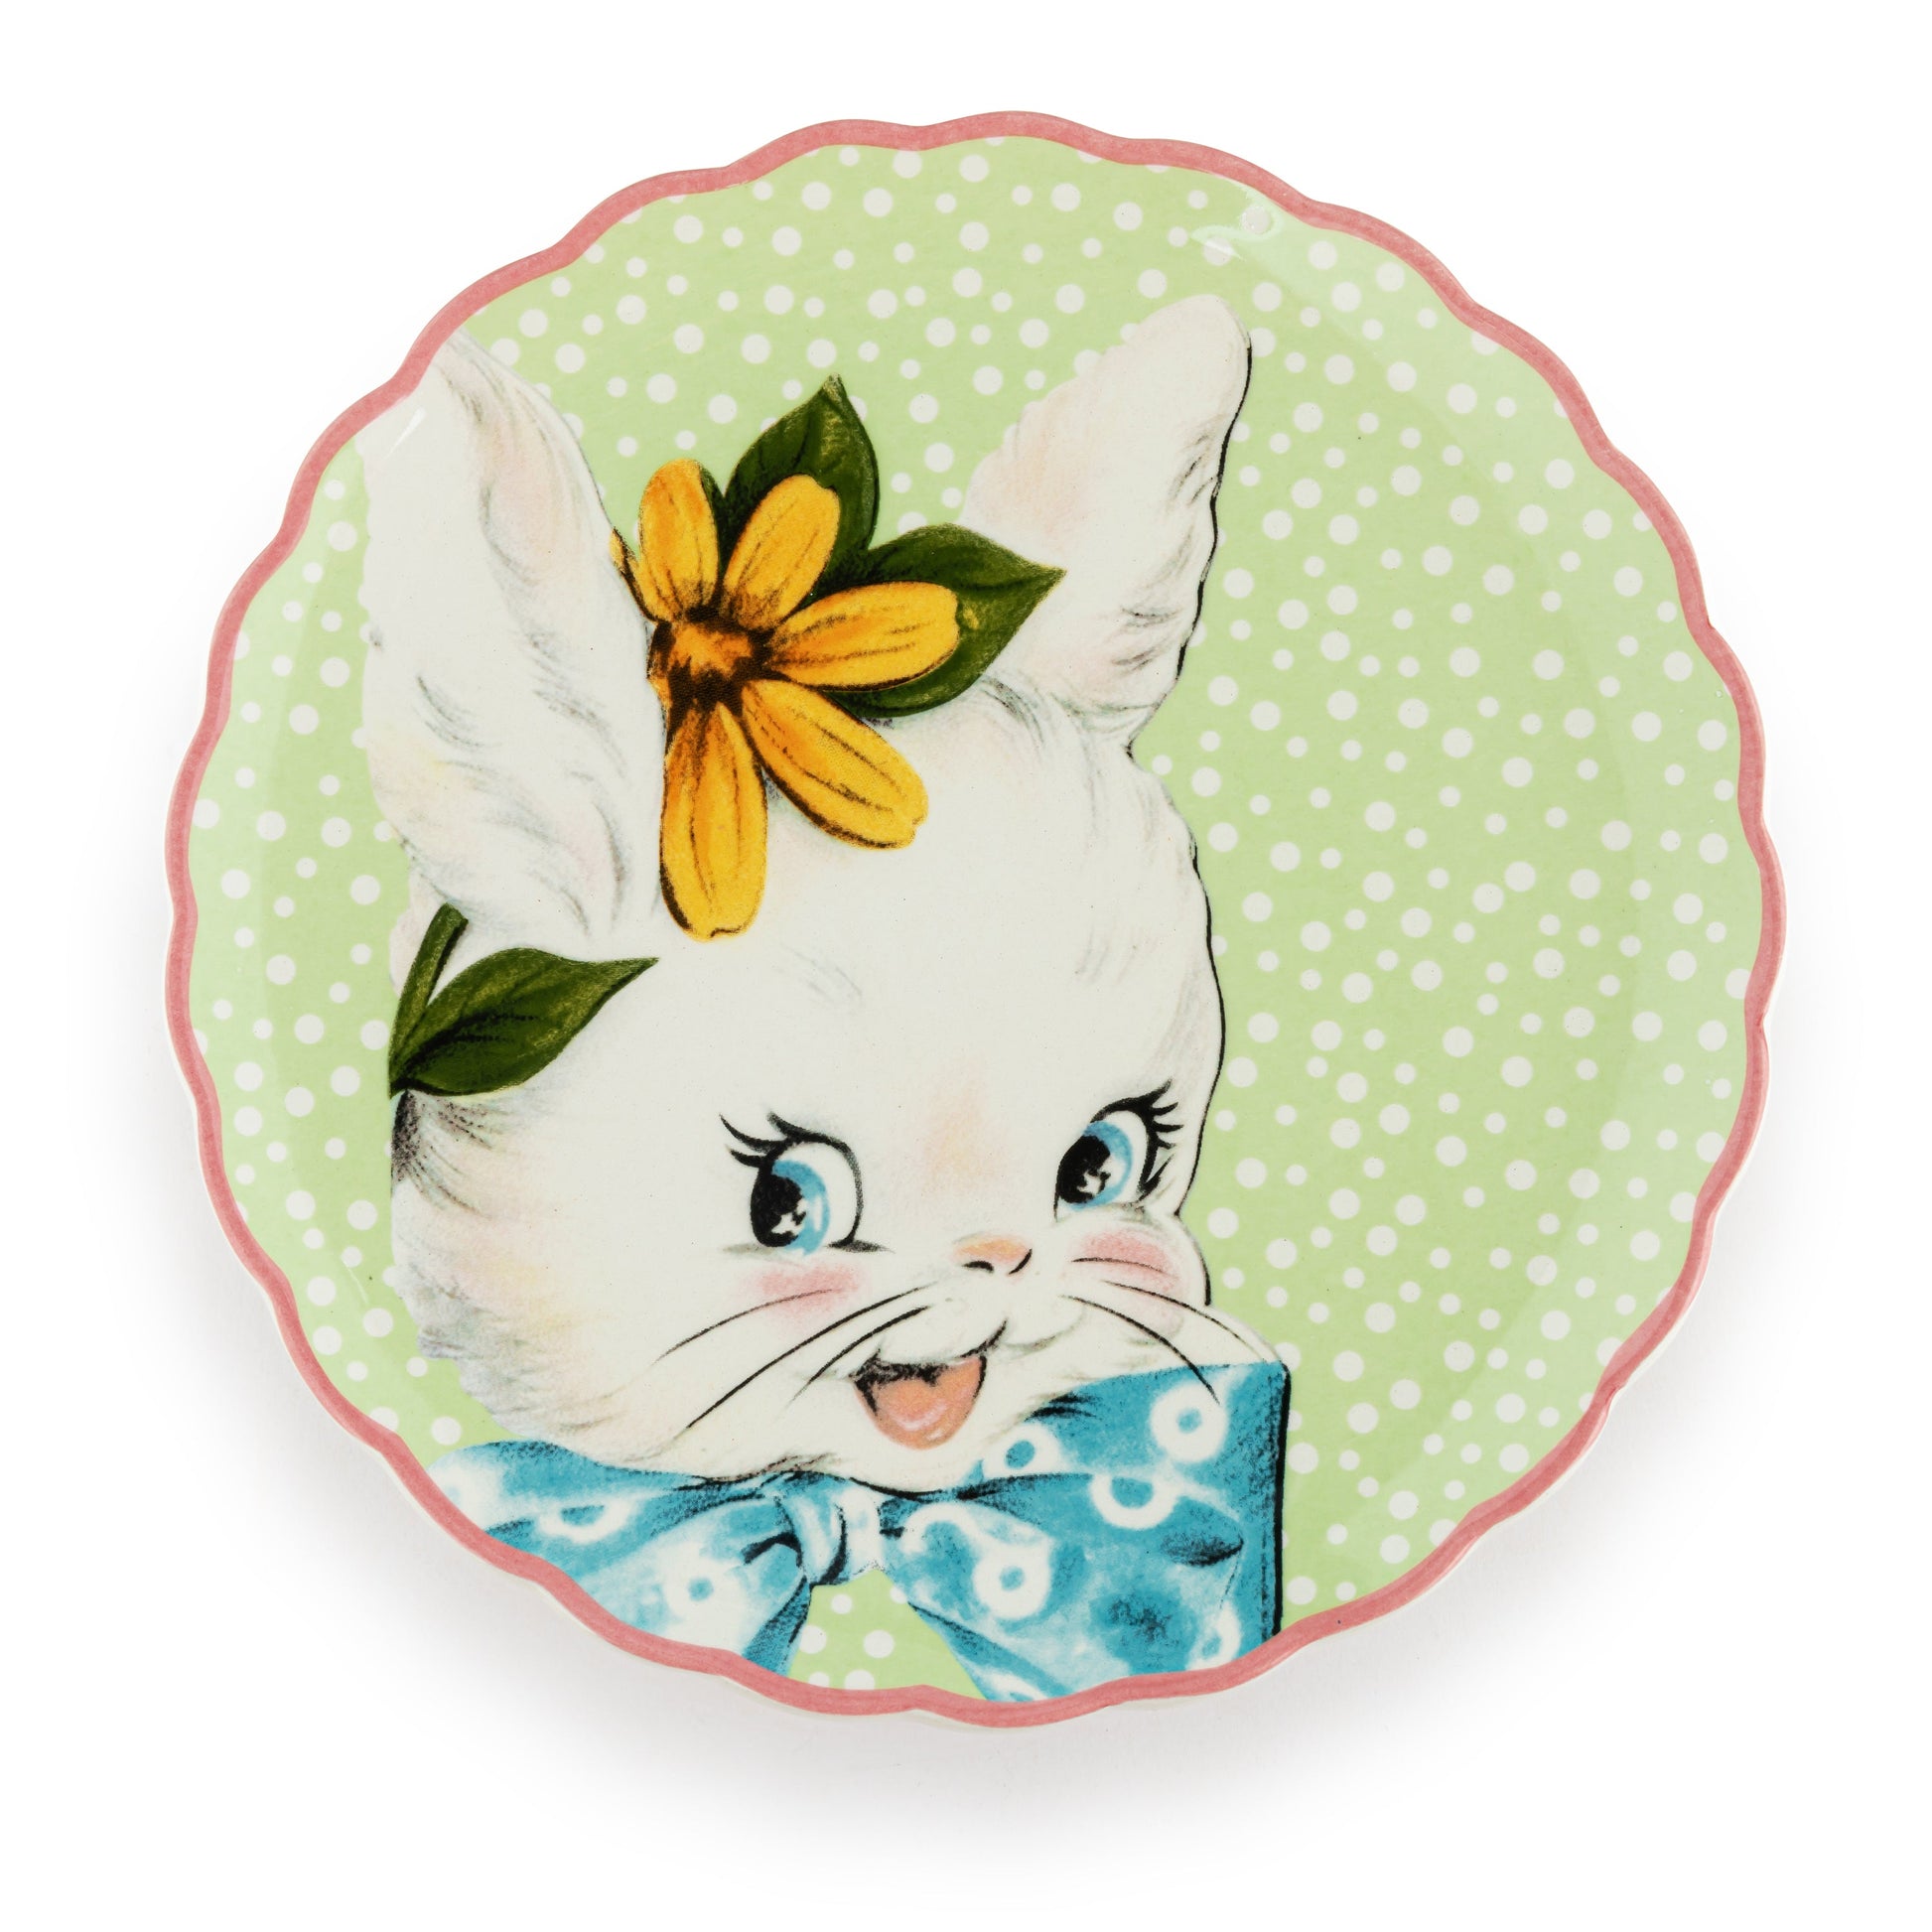 Mr. Cottontail 8" Ceramic Set of 4 Easter Plates - Mr. Christmas